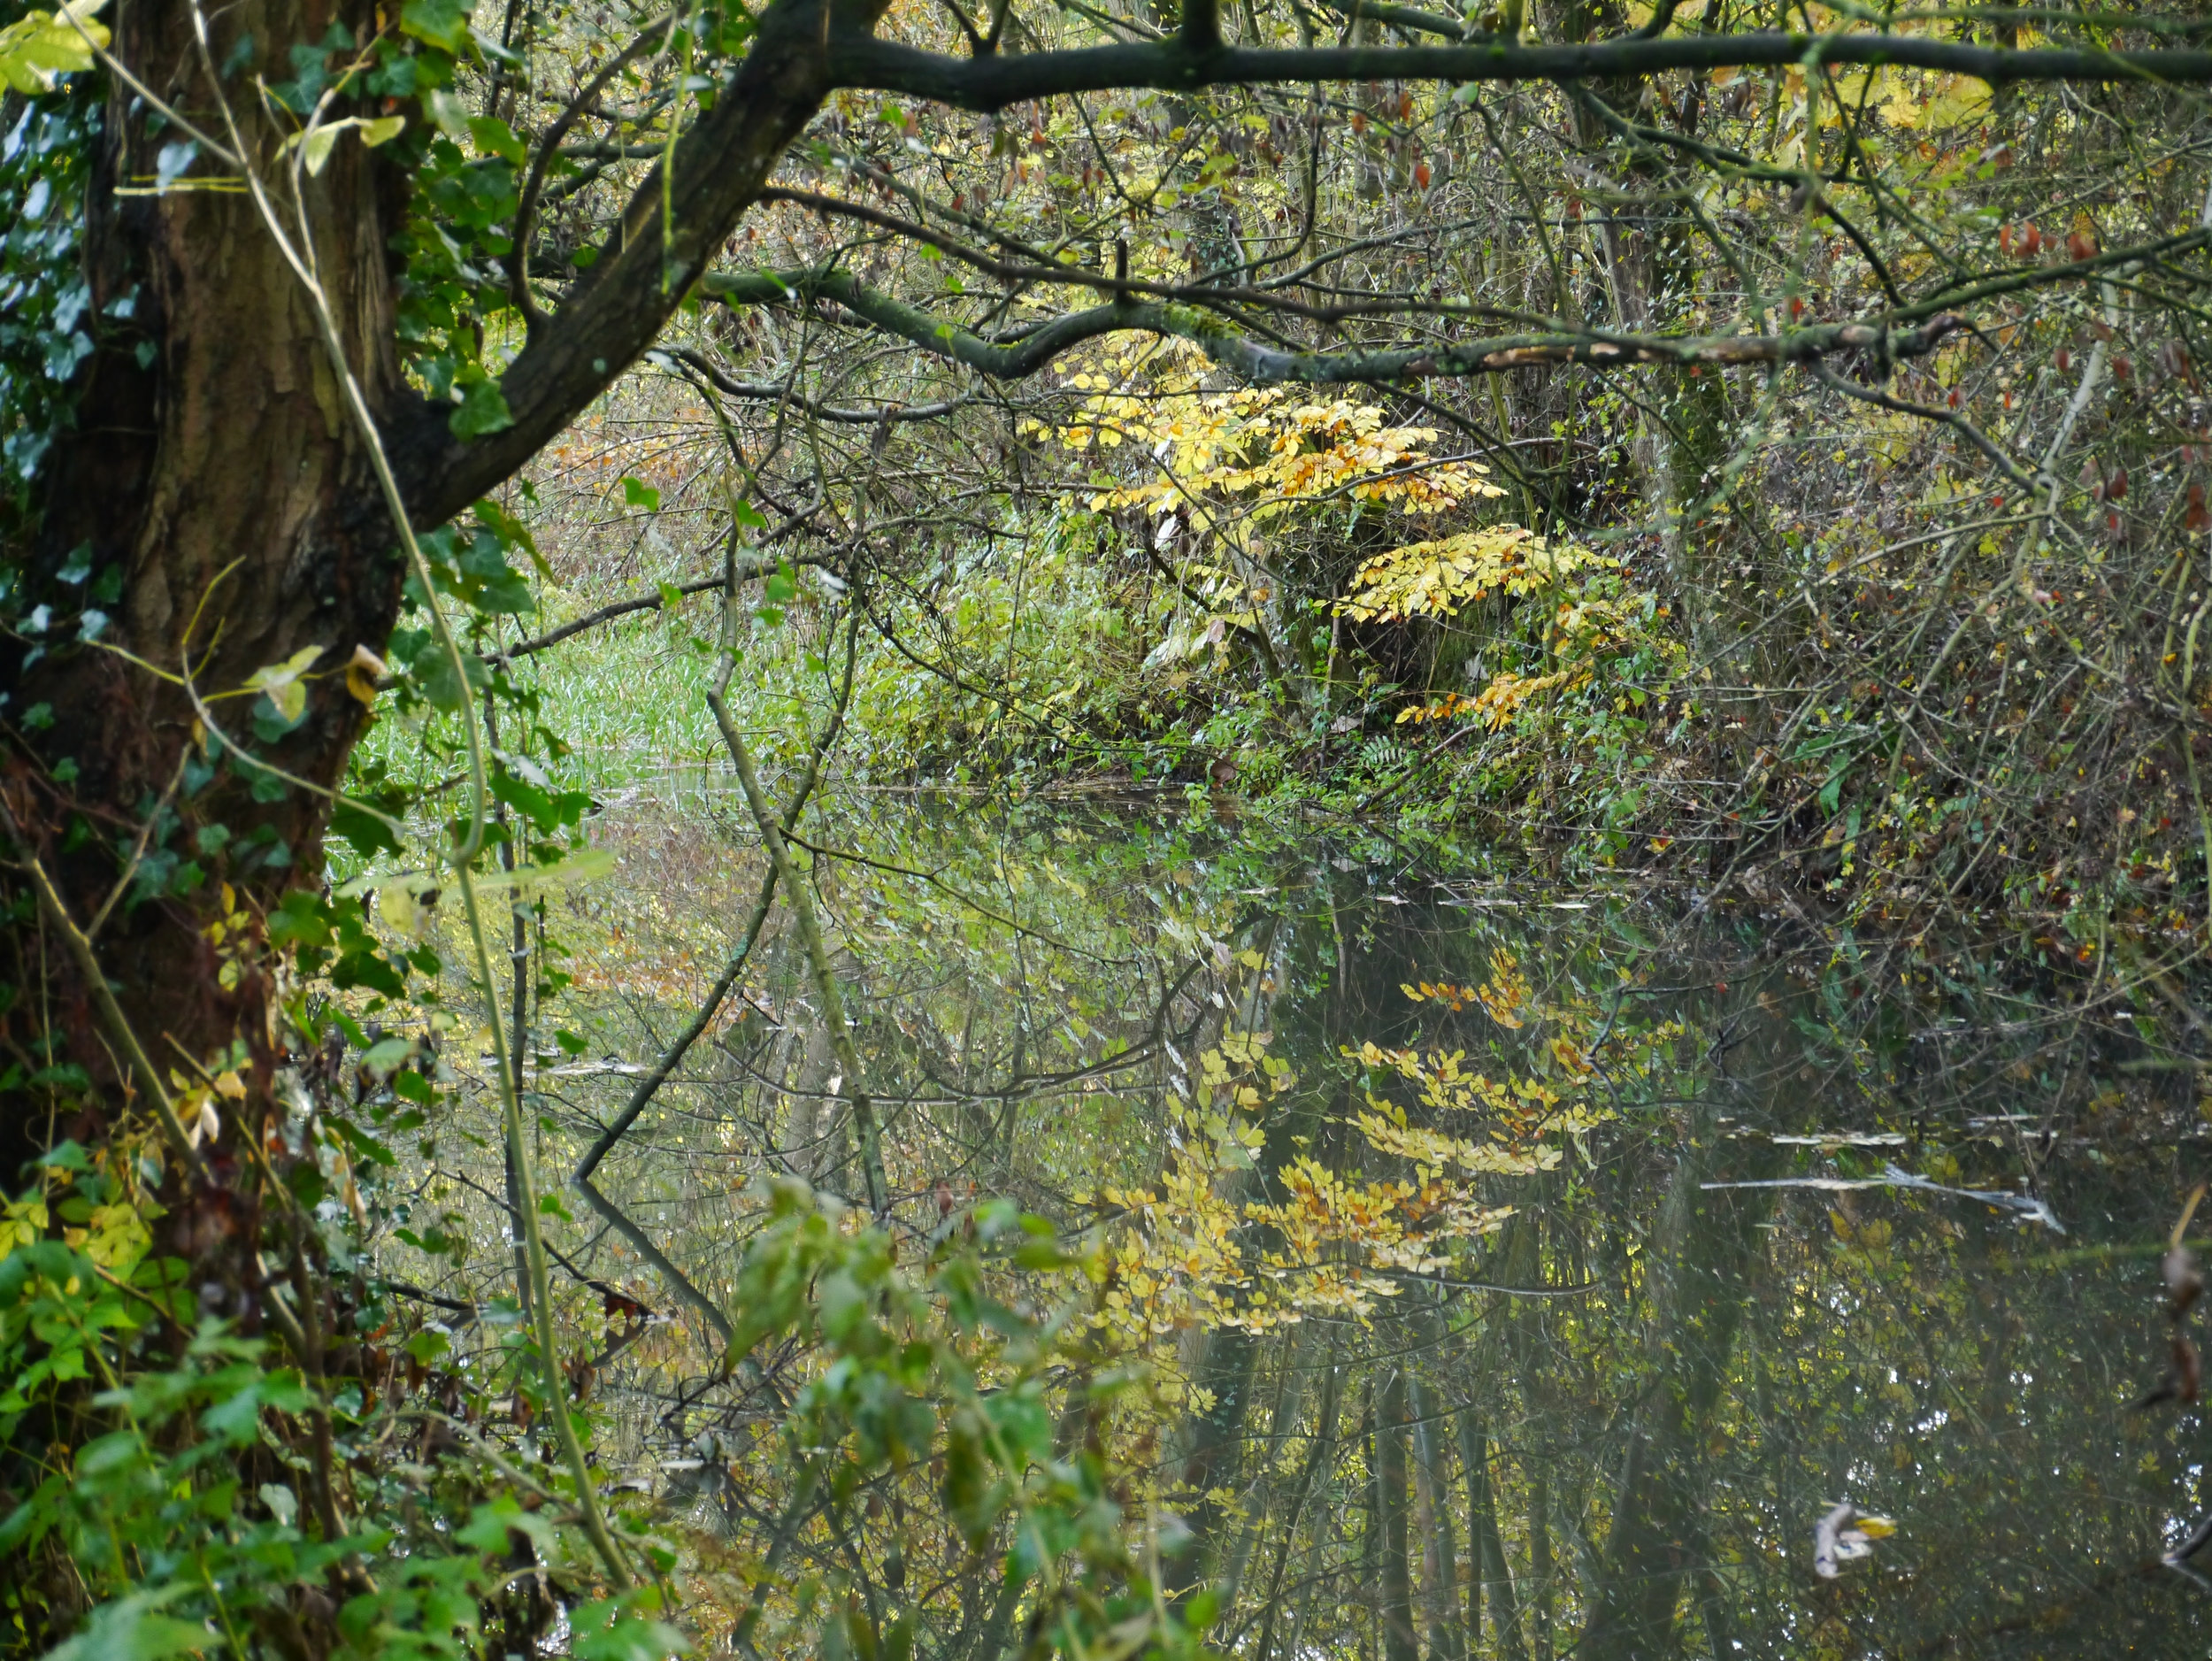 Cromford canal